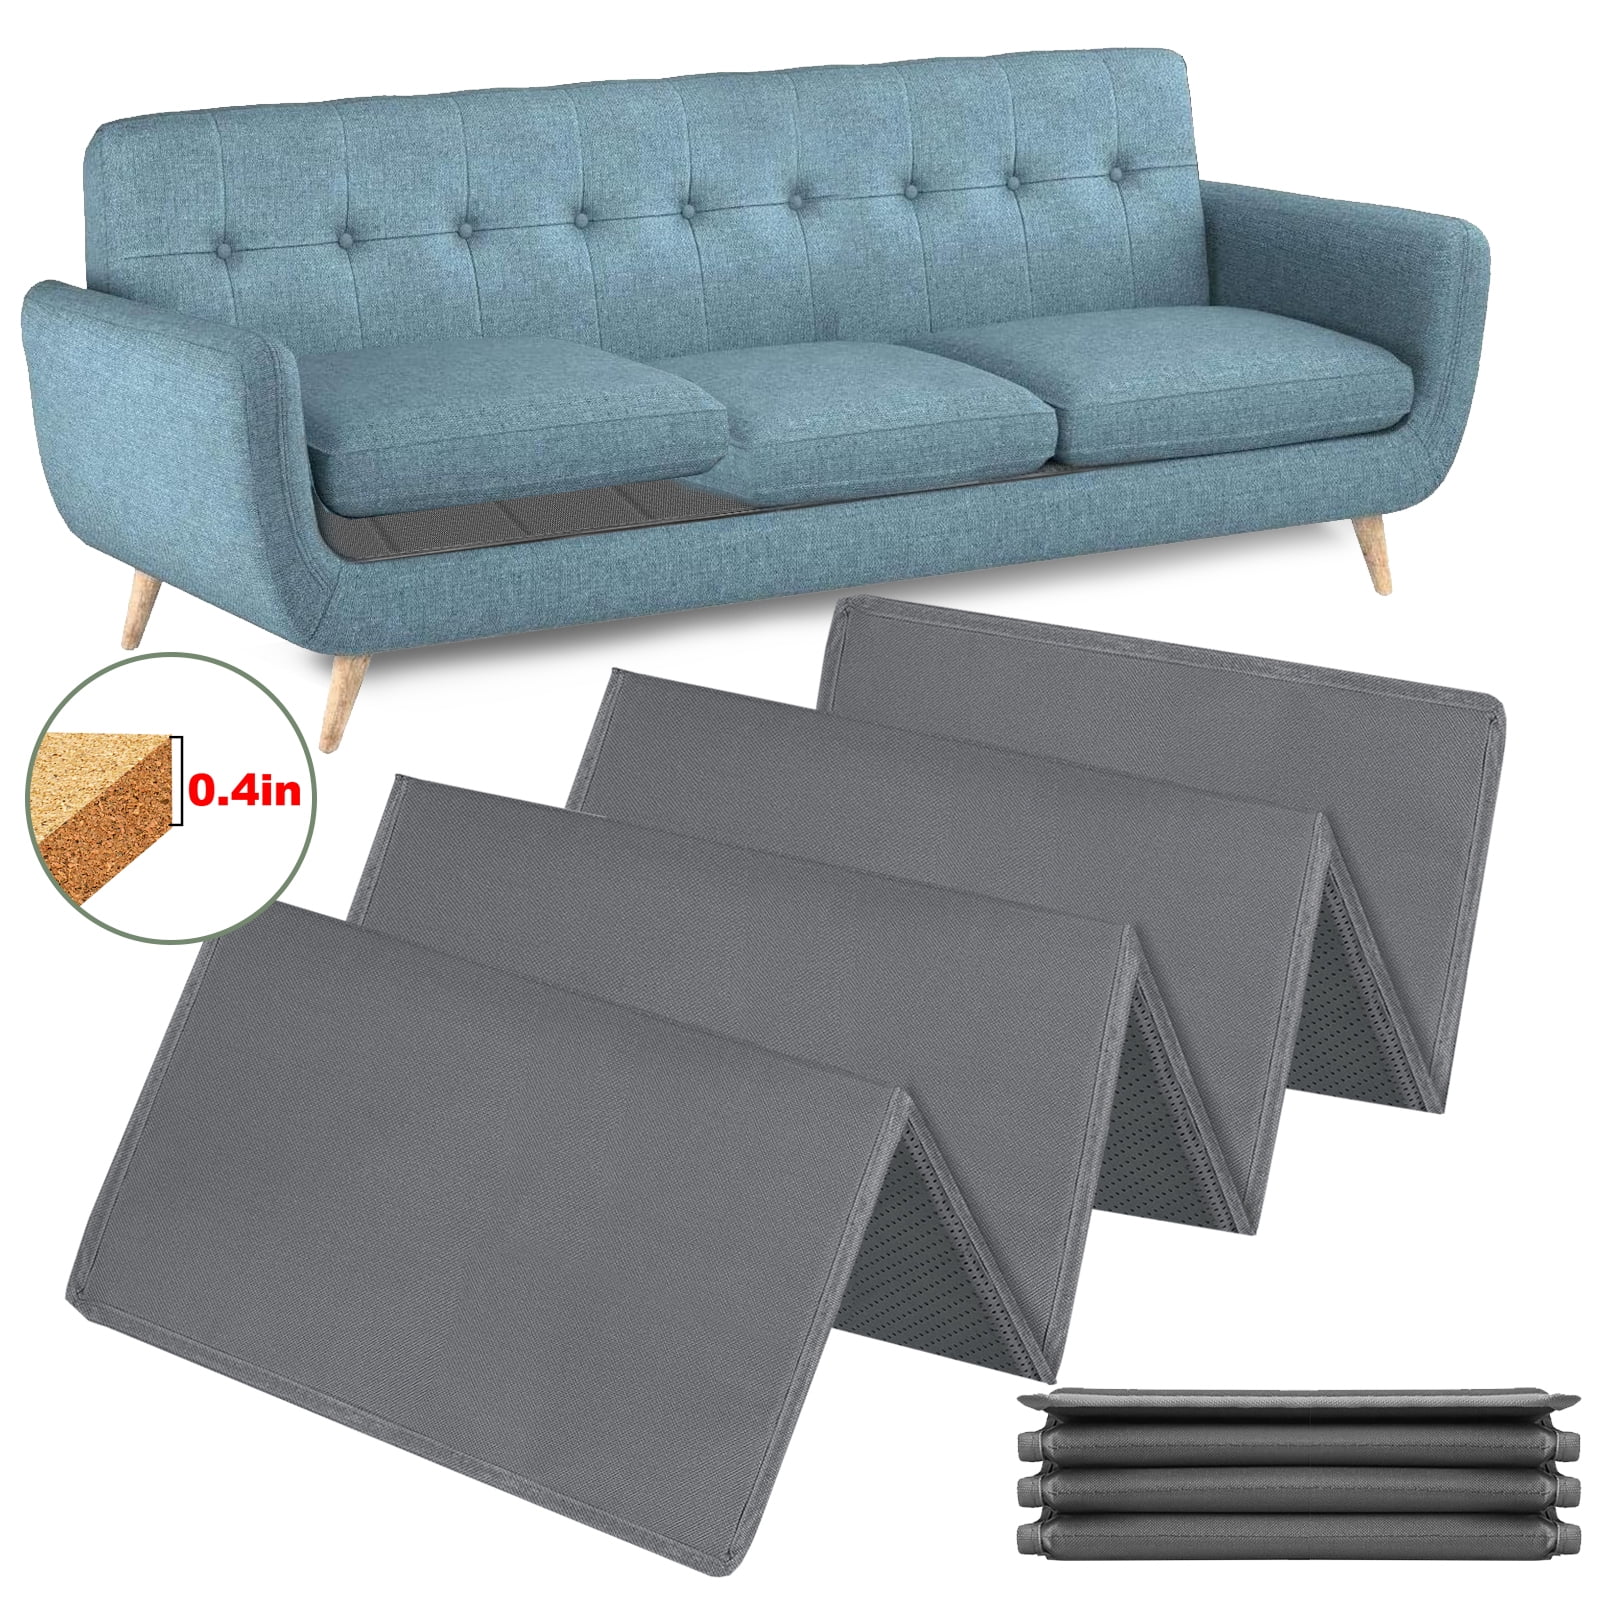 Homyfort Couch Cushion Support,Couch Supports for Sagging Cushions - Heavy  Duty Sofa Saver Cushion Support Board Under The Cushions for Sagging  /Sinking Seat,17”x44” 